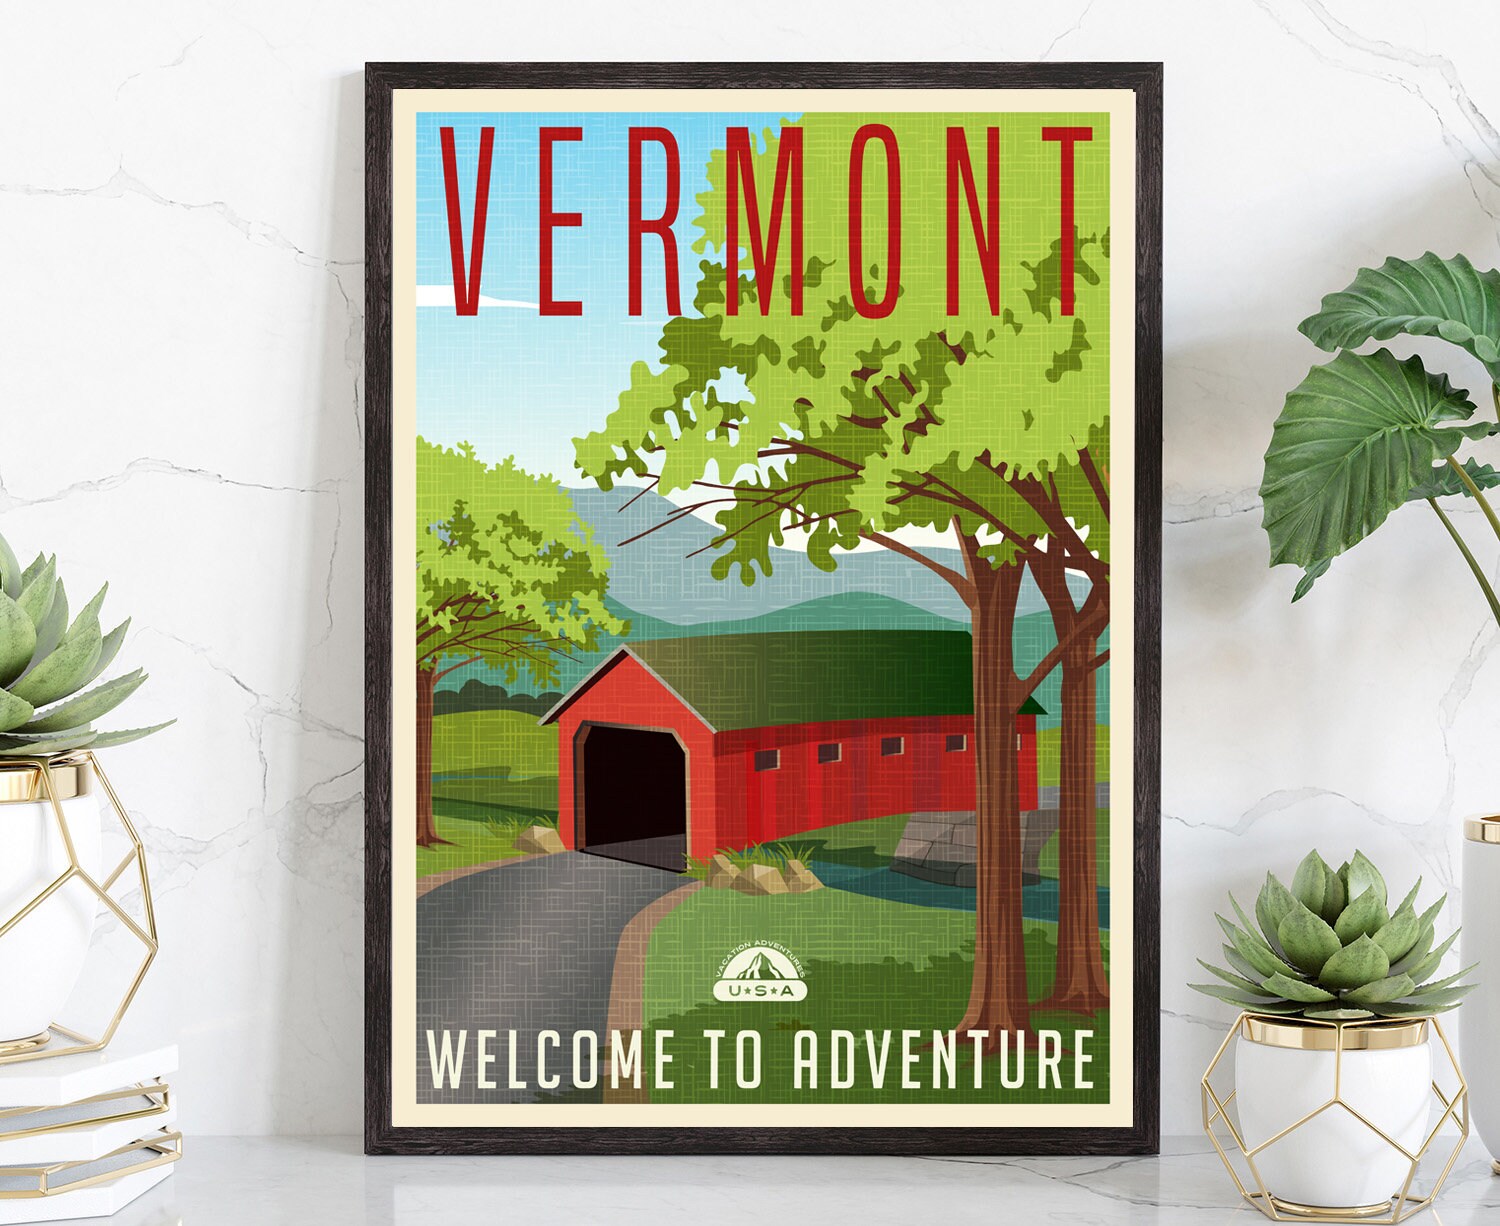 Retro Style Travel Poster, Vermont Vintage Rustic Poster Print, Home Wall Art, Office Wall Decor, Poster Prints, Vermont, State Map Poster